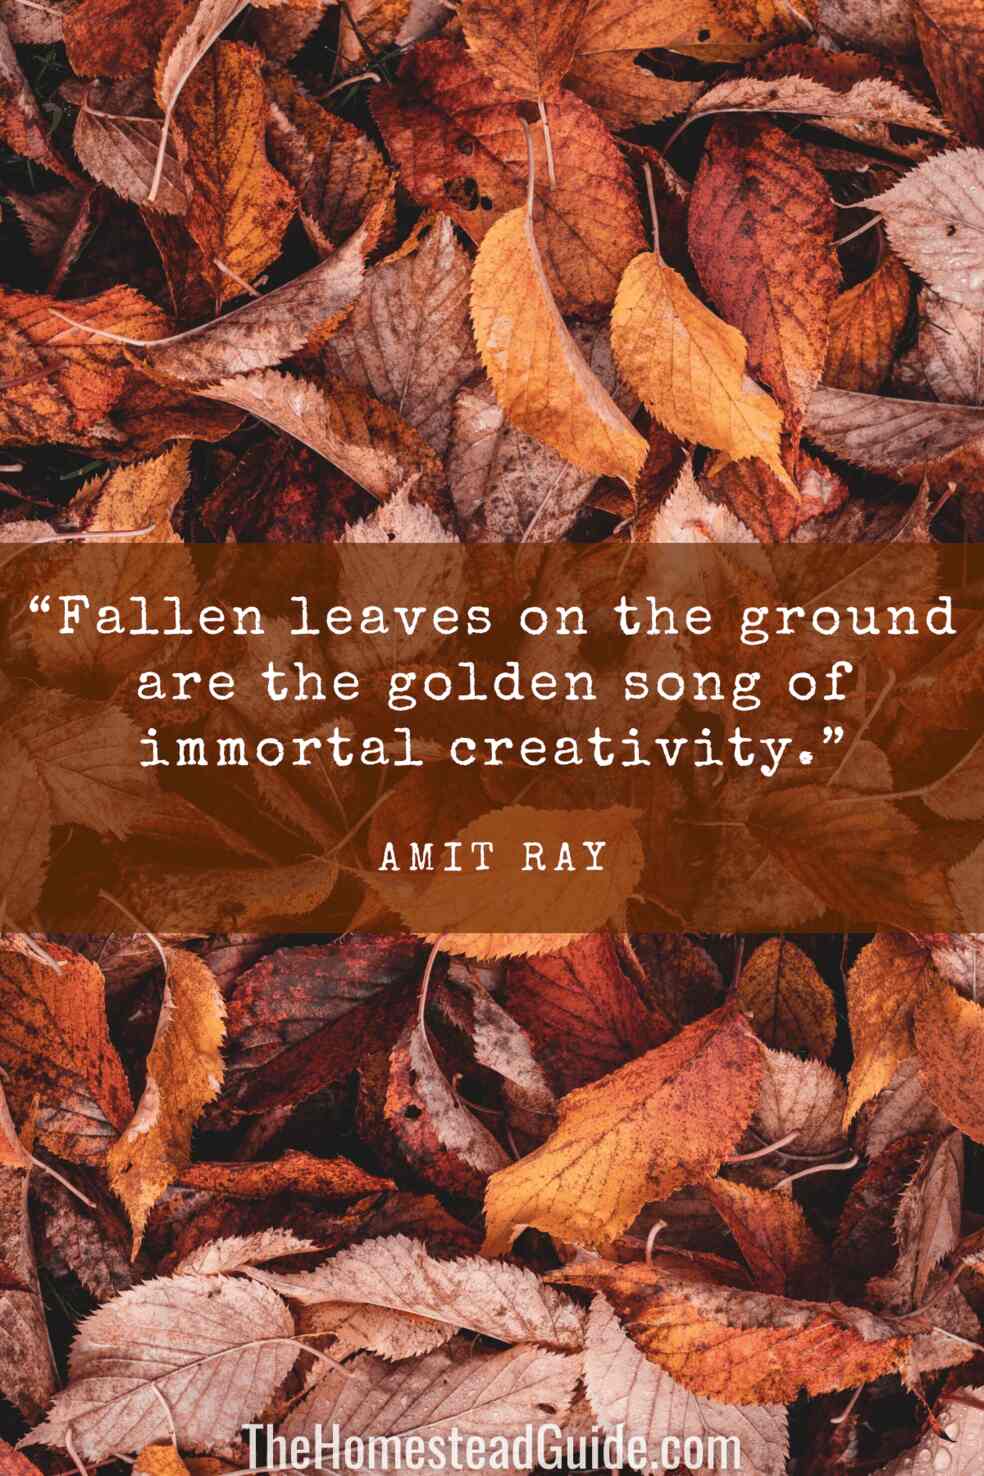 Fallen leaves on the ground are the golden song of immortal creativity.